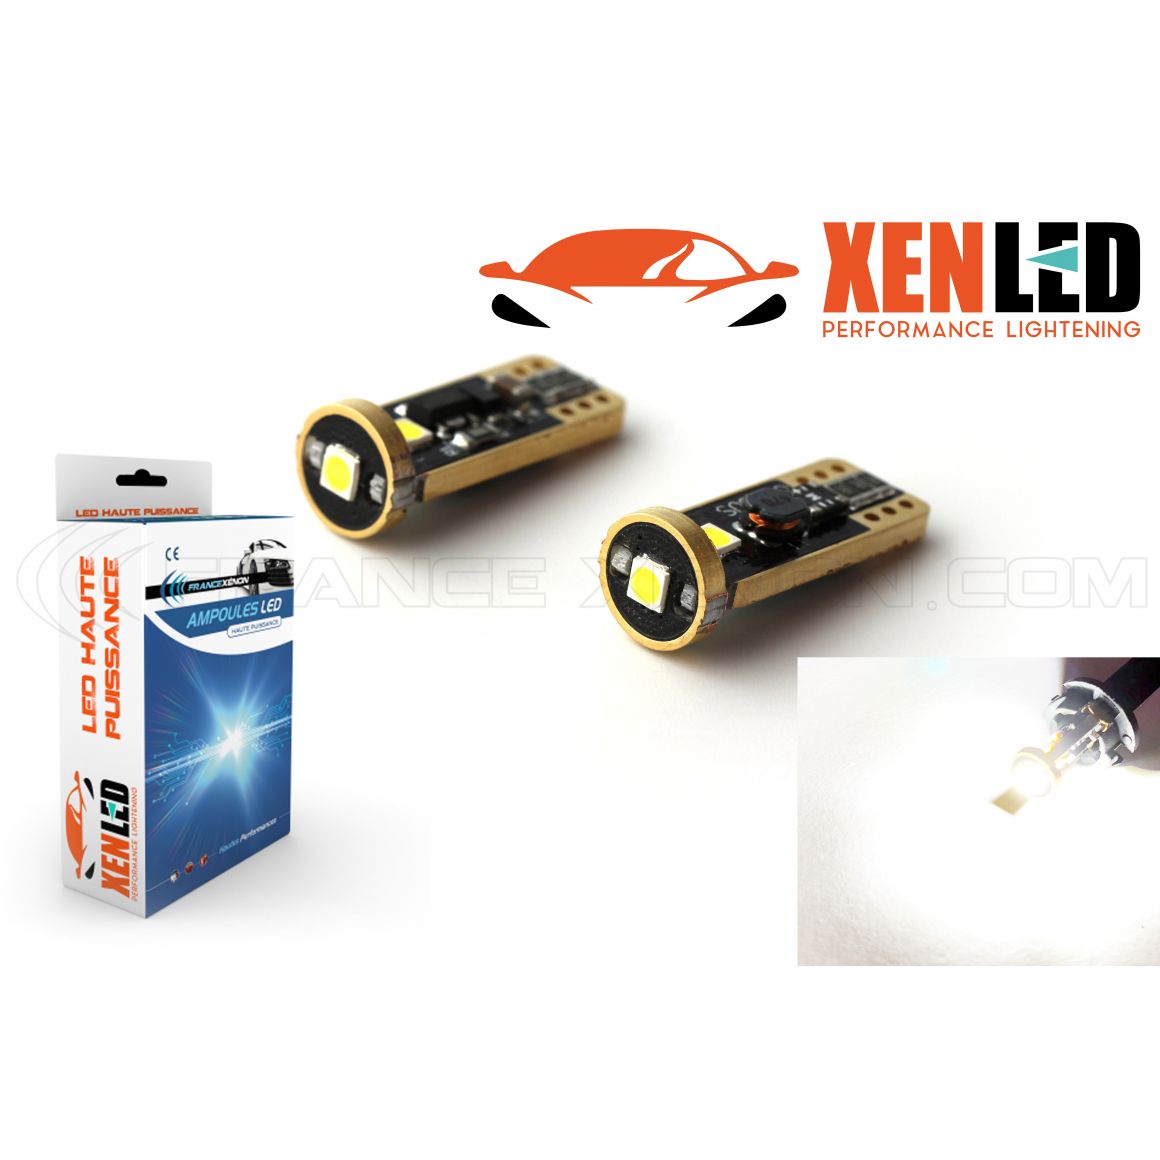 2 x AMPOULES W5W 3-LED Super Canbus 400Lms XENLED - GOLD - Blanc 12V -  France-Xenon